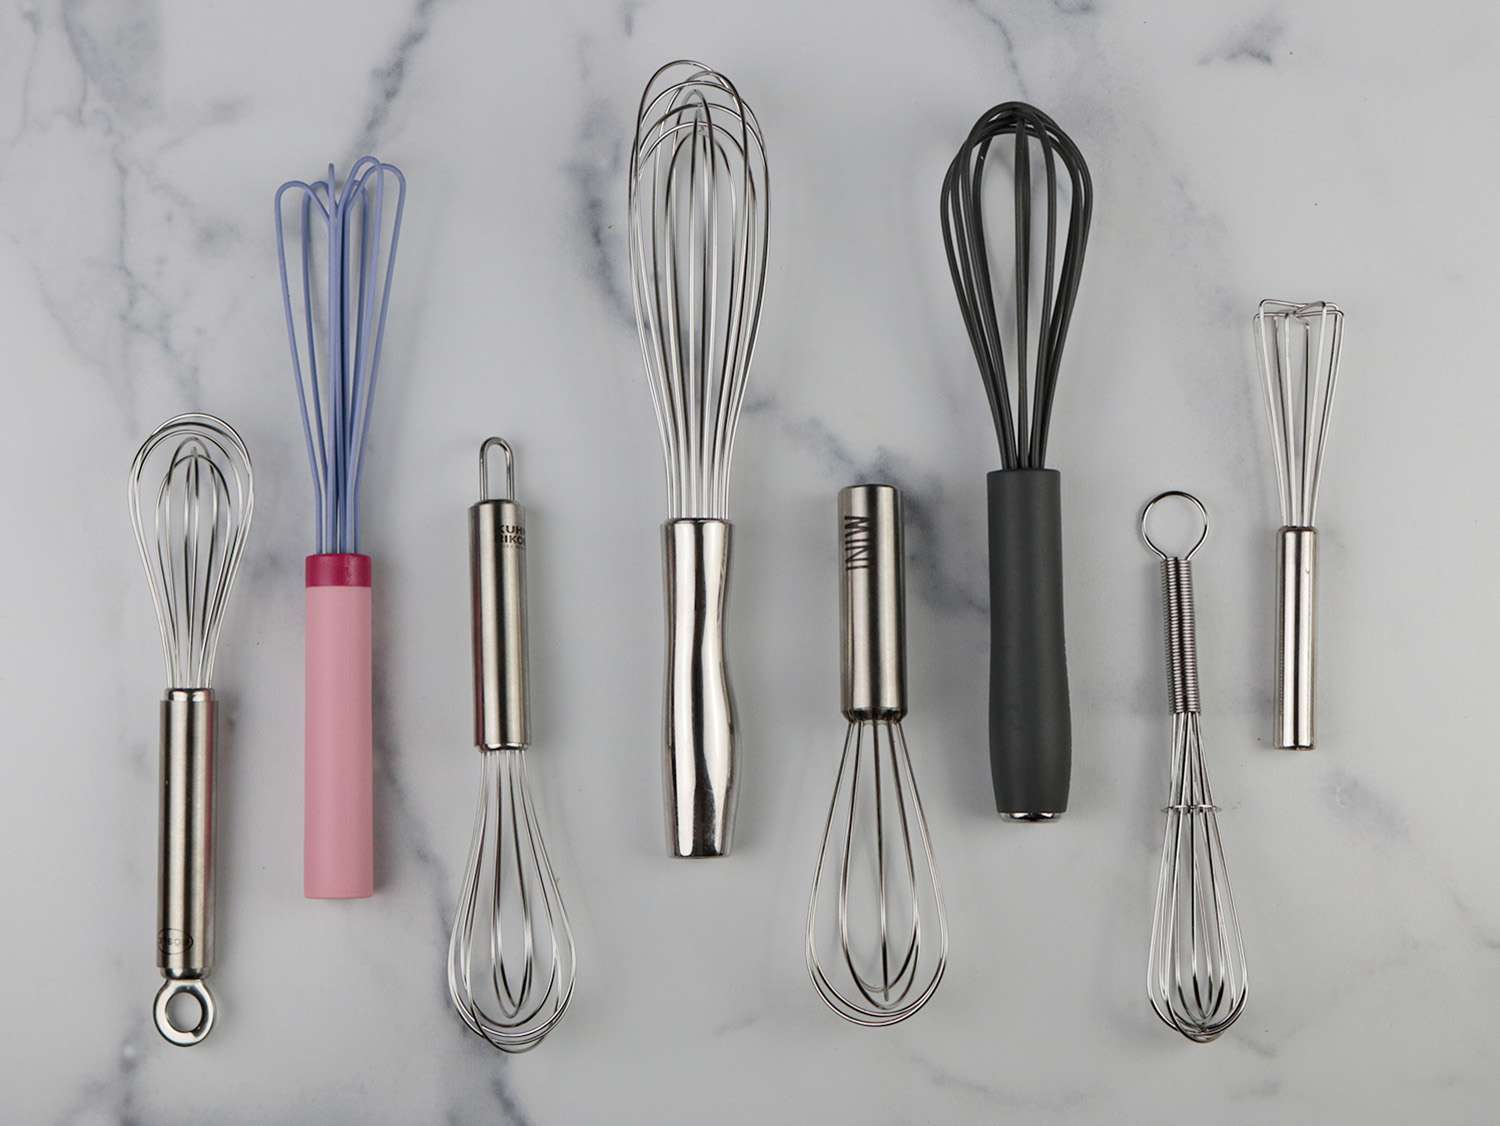 eight different miniature whisks on a marble background